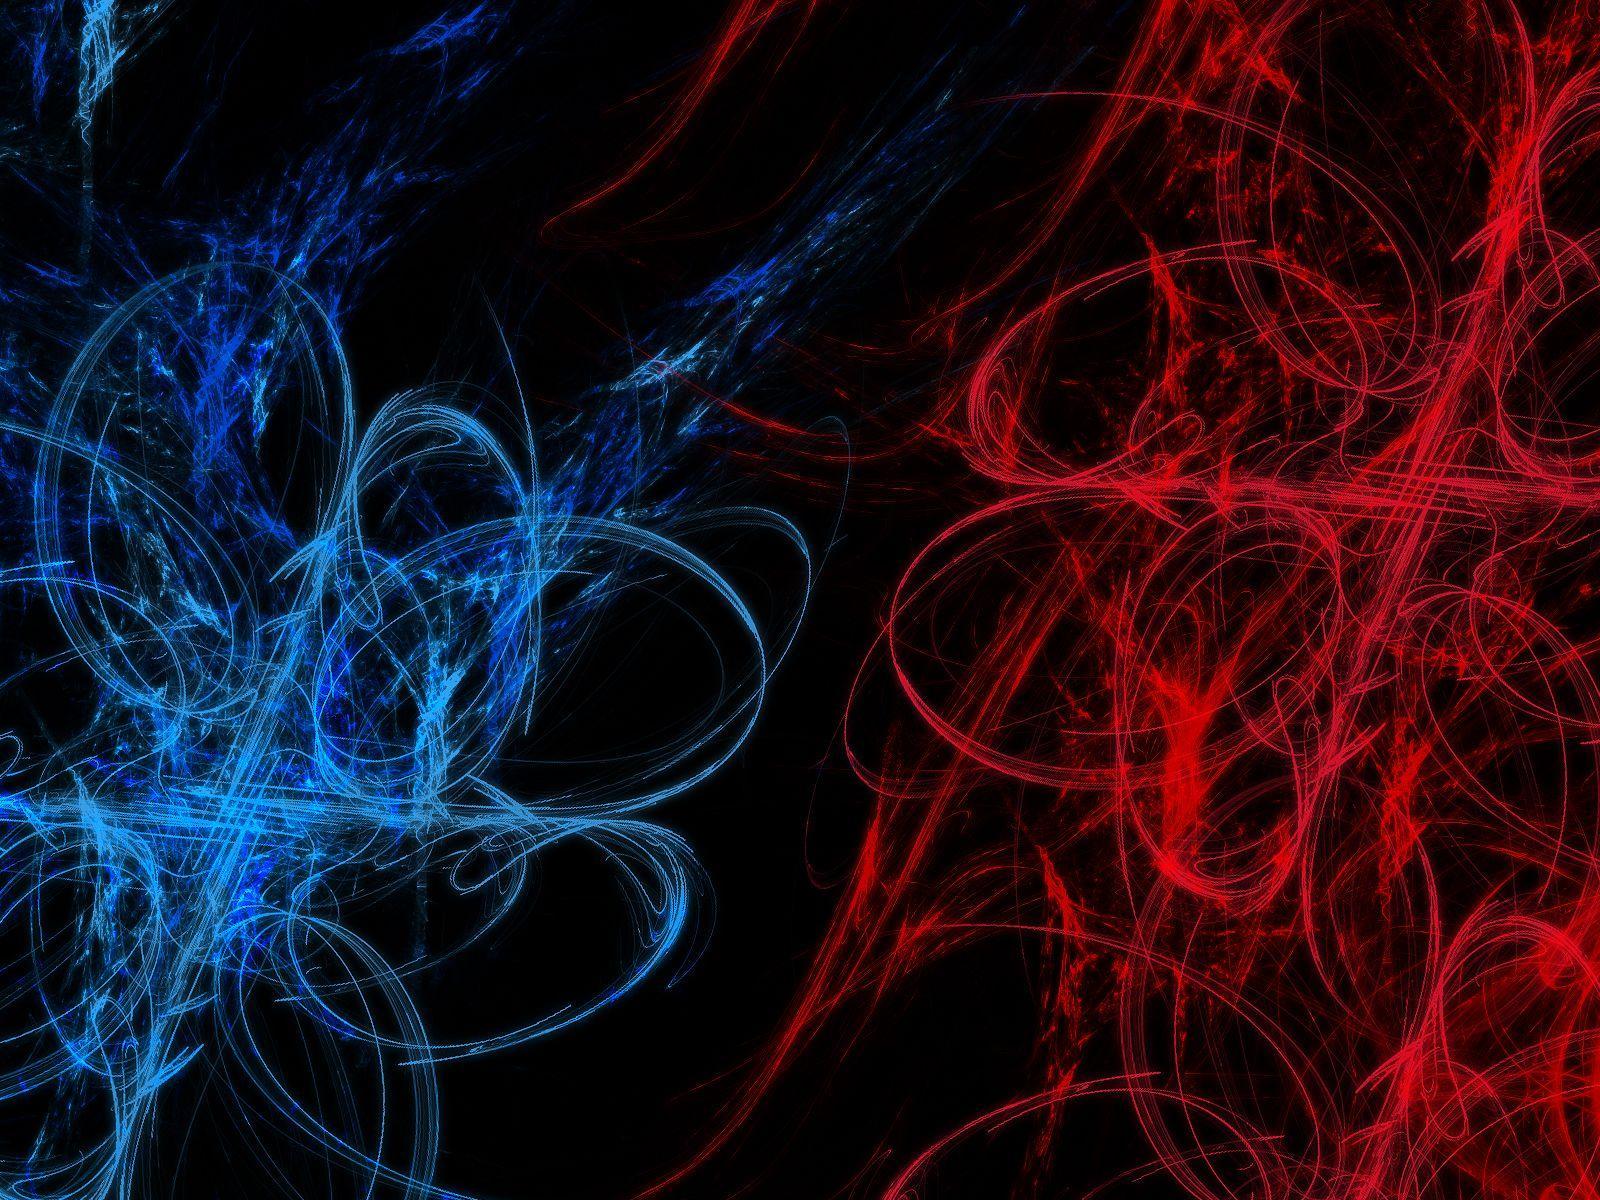 Hot and cold. Abstract Wallpaper. Red and blue